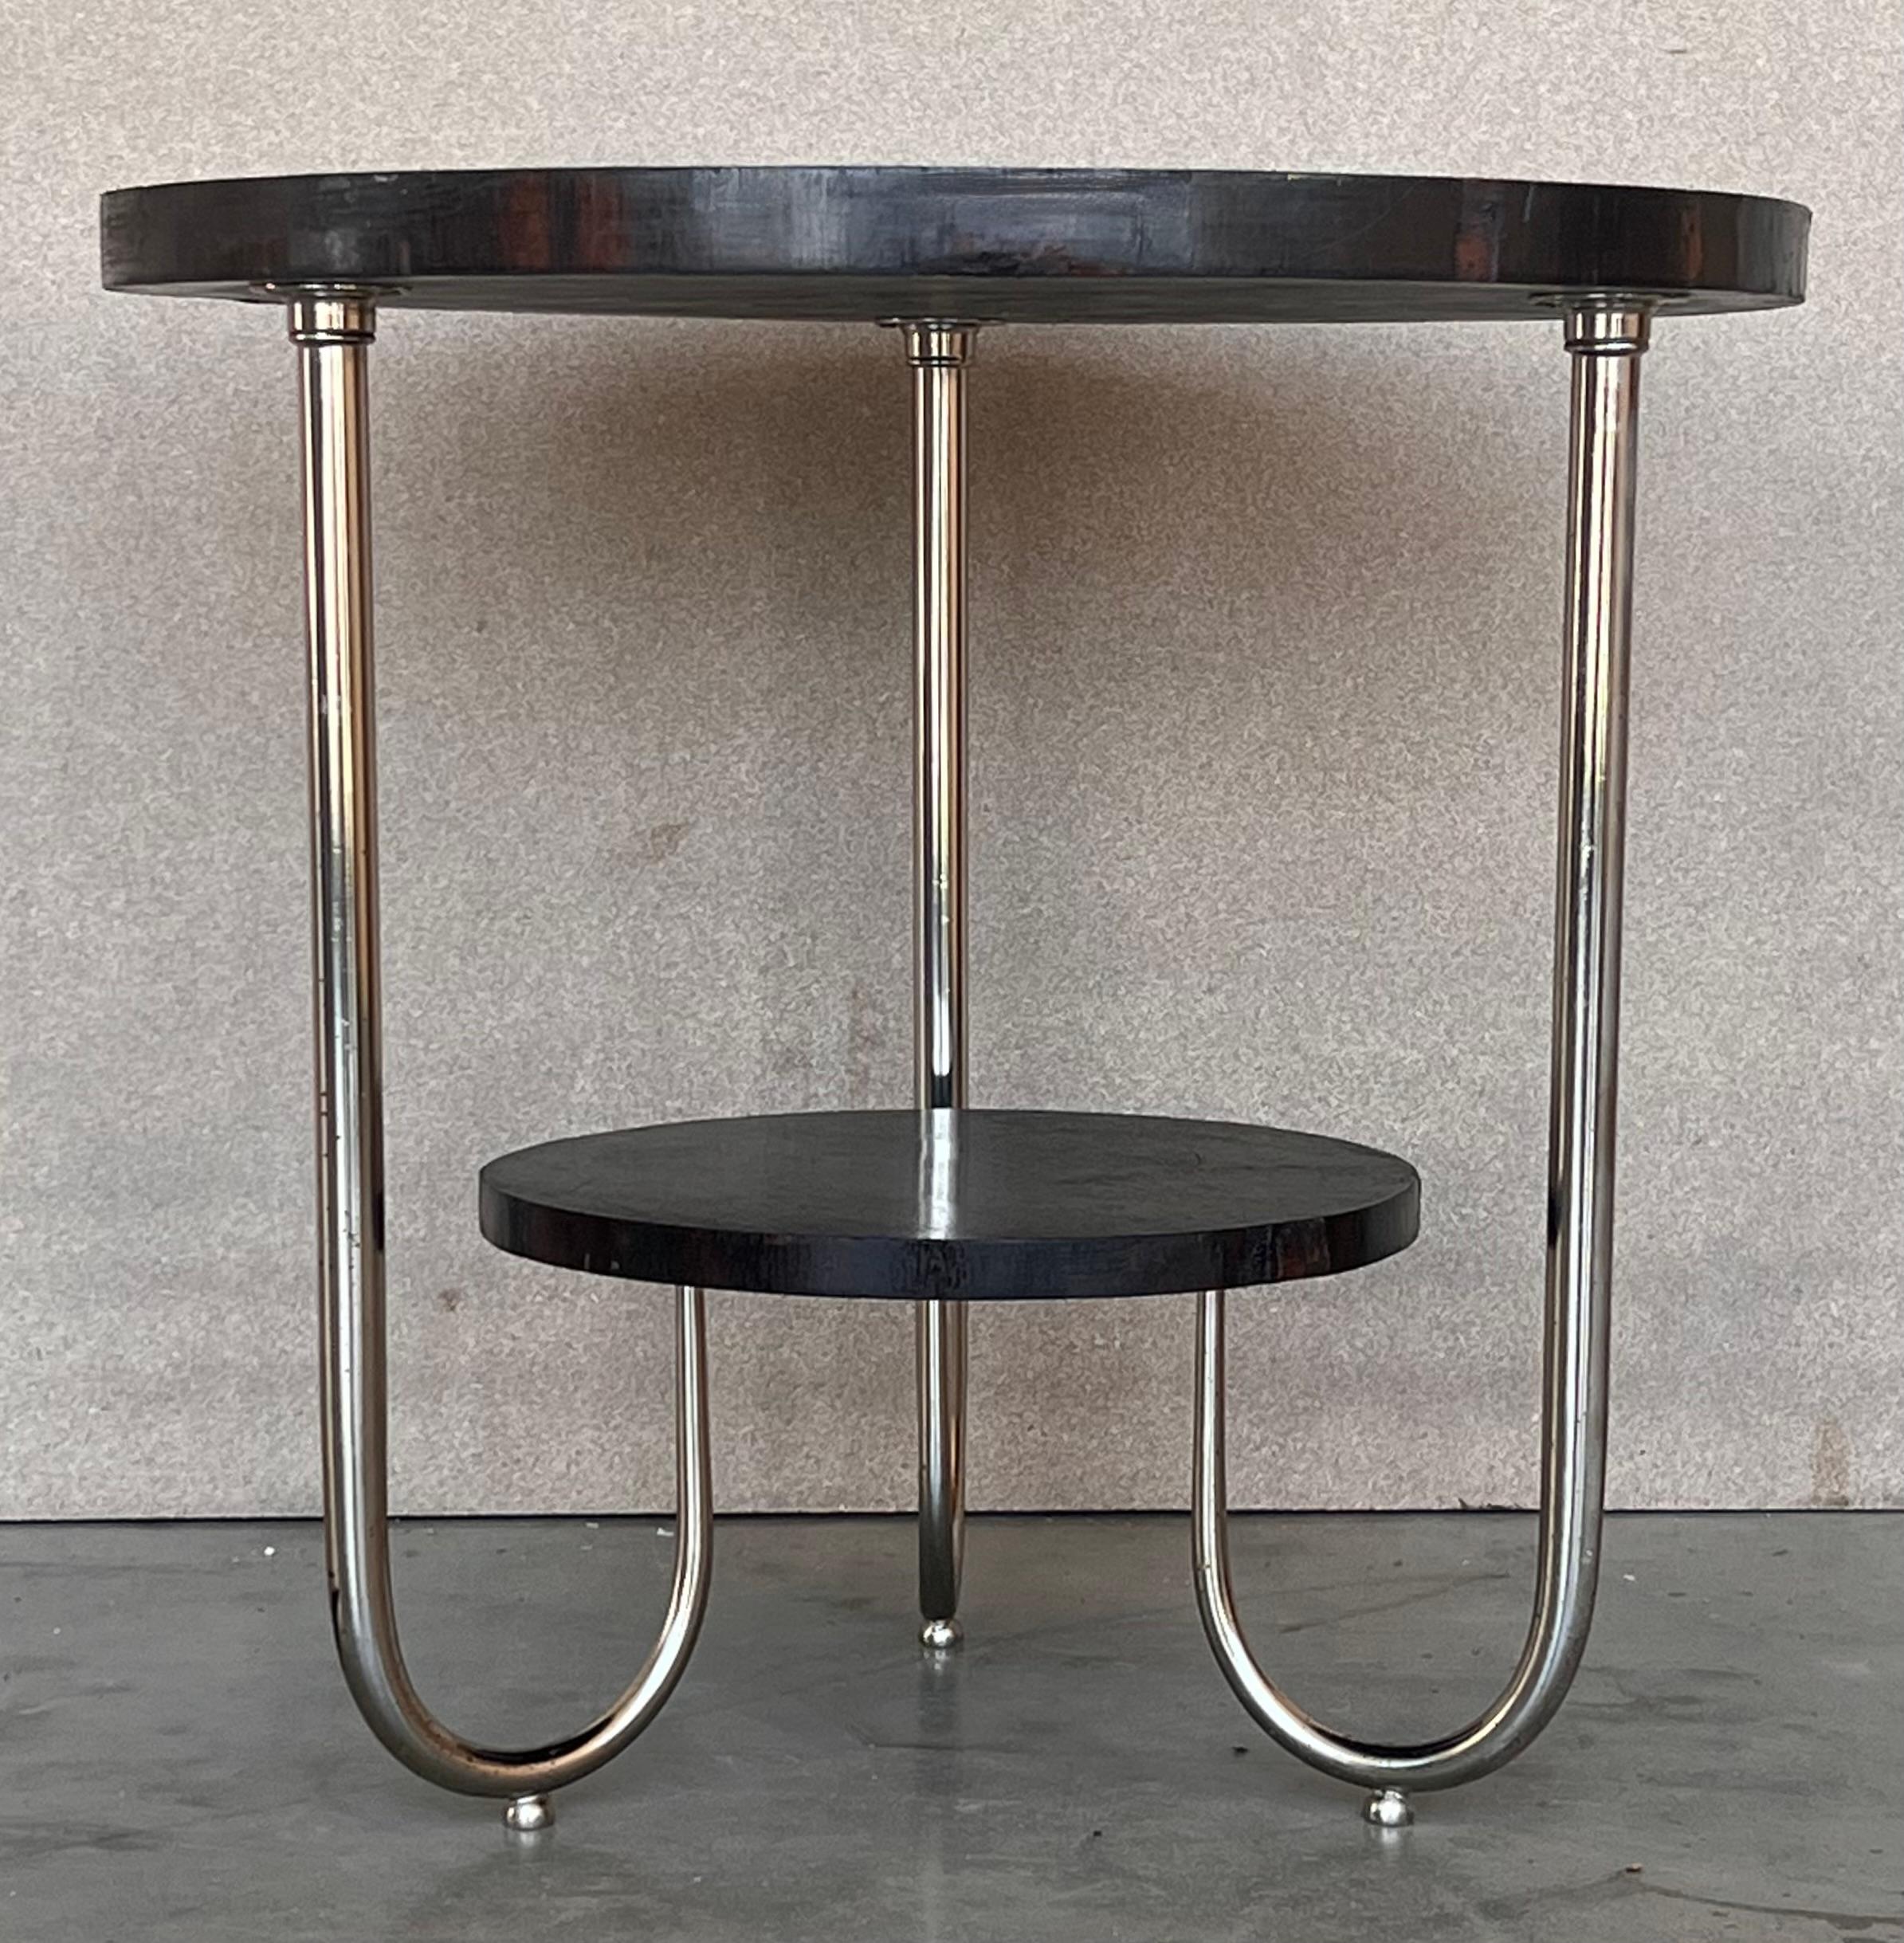 A Fine French Art Deco Mahogany and Chrome Two-Tiered Gueridon Side Table For Sale 2